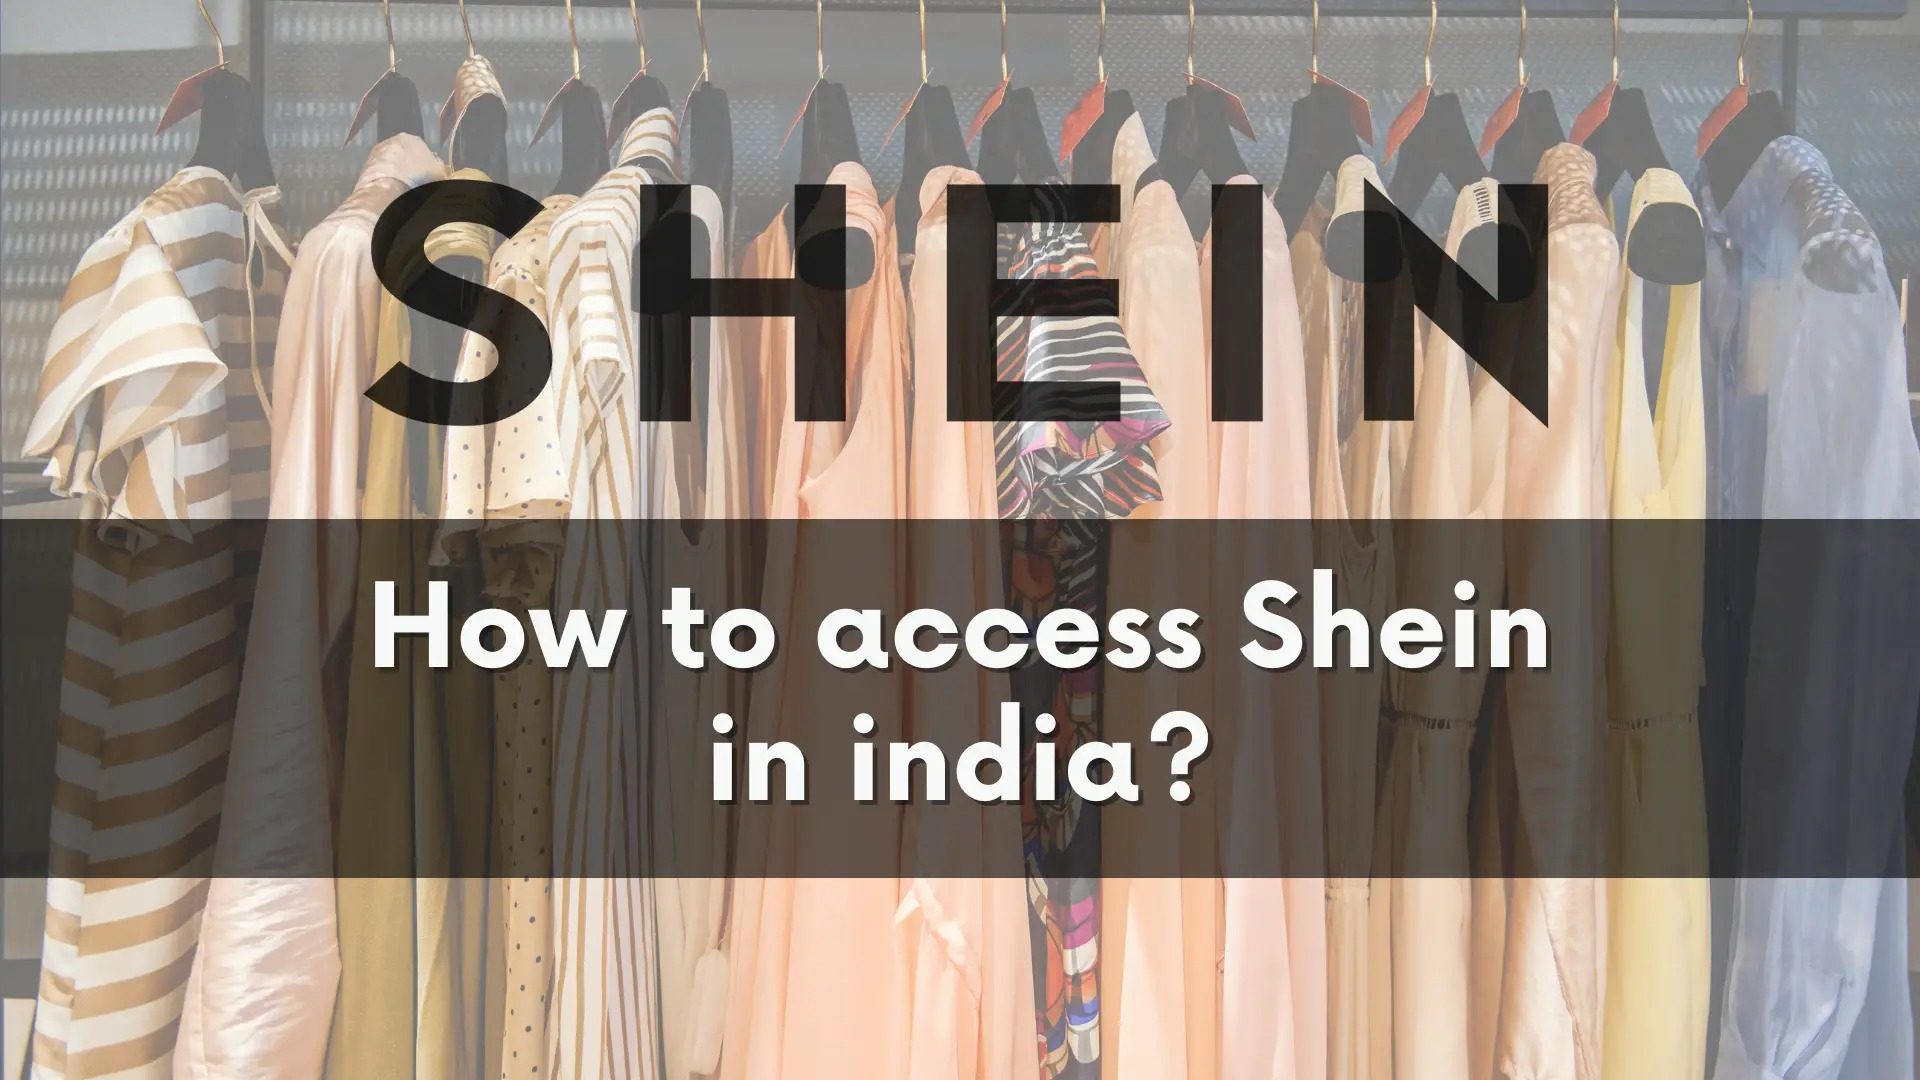 How to access Shein in India?